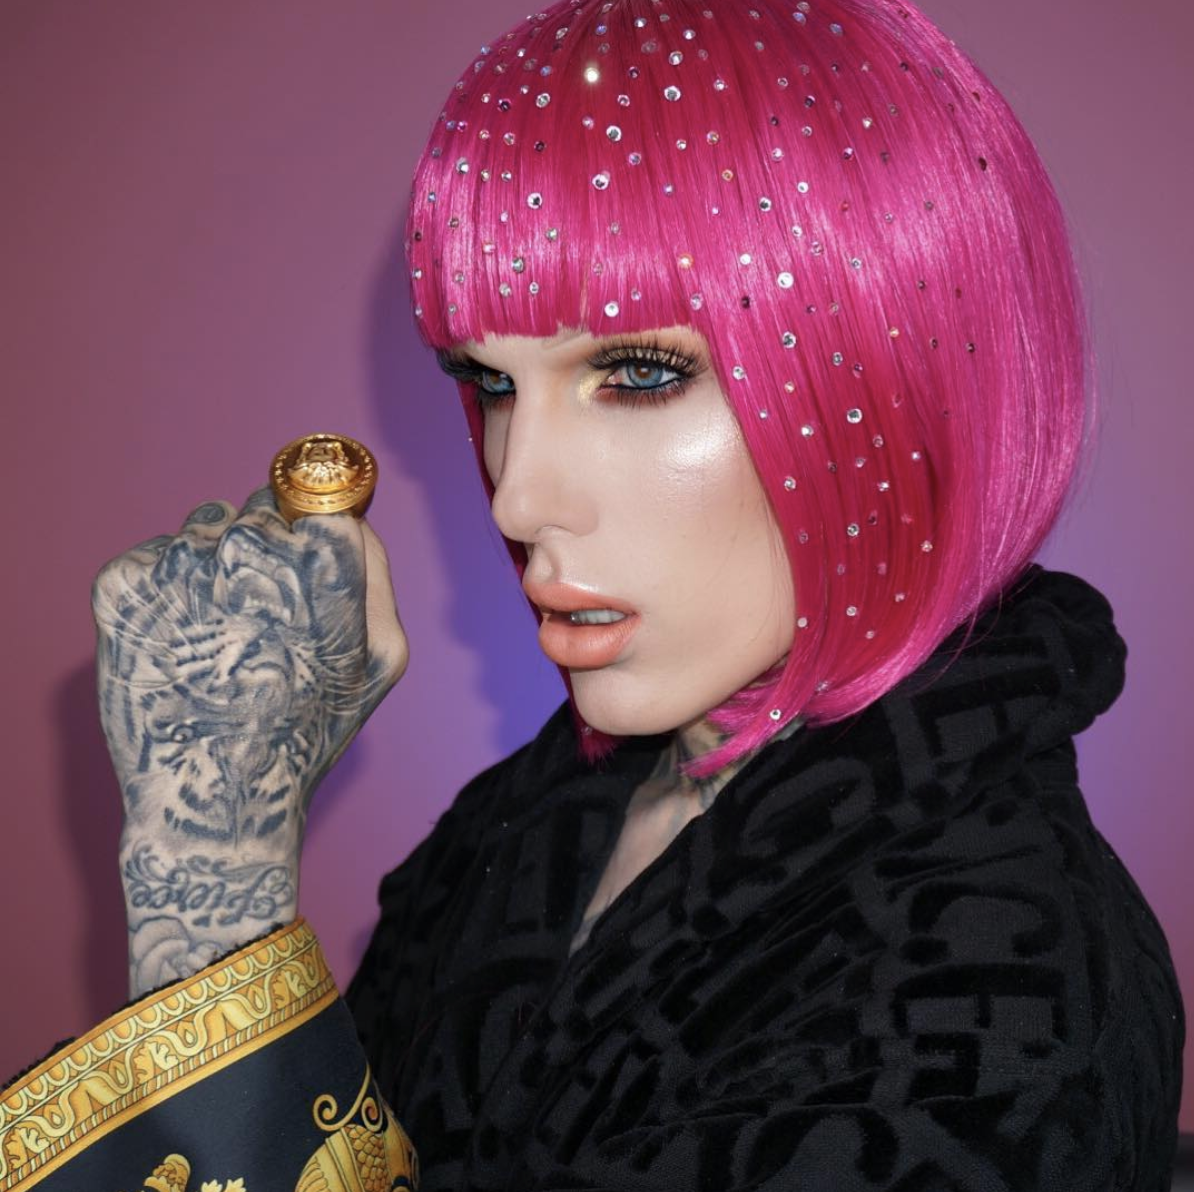 STAR QUALITY: HOW JEFFREE STAR’S RISE TO FAME REFLECTS THE NEW WORLD OF SOCIAL MEDIA MAKEUP